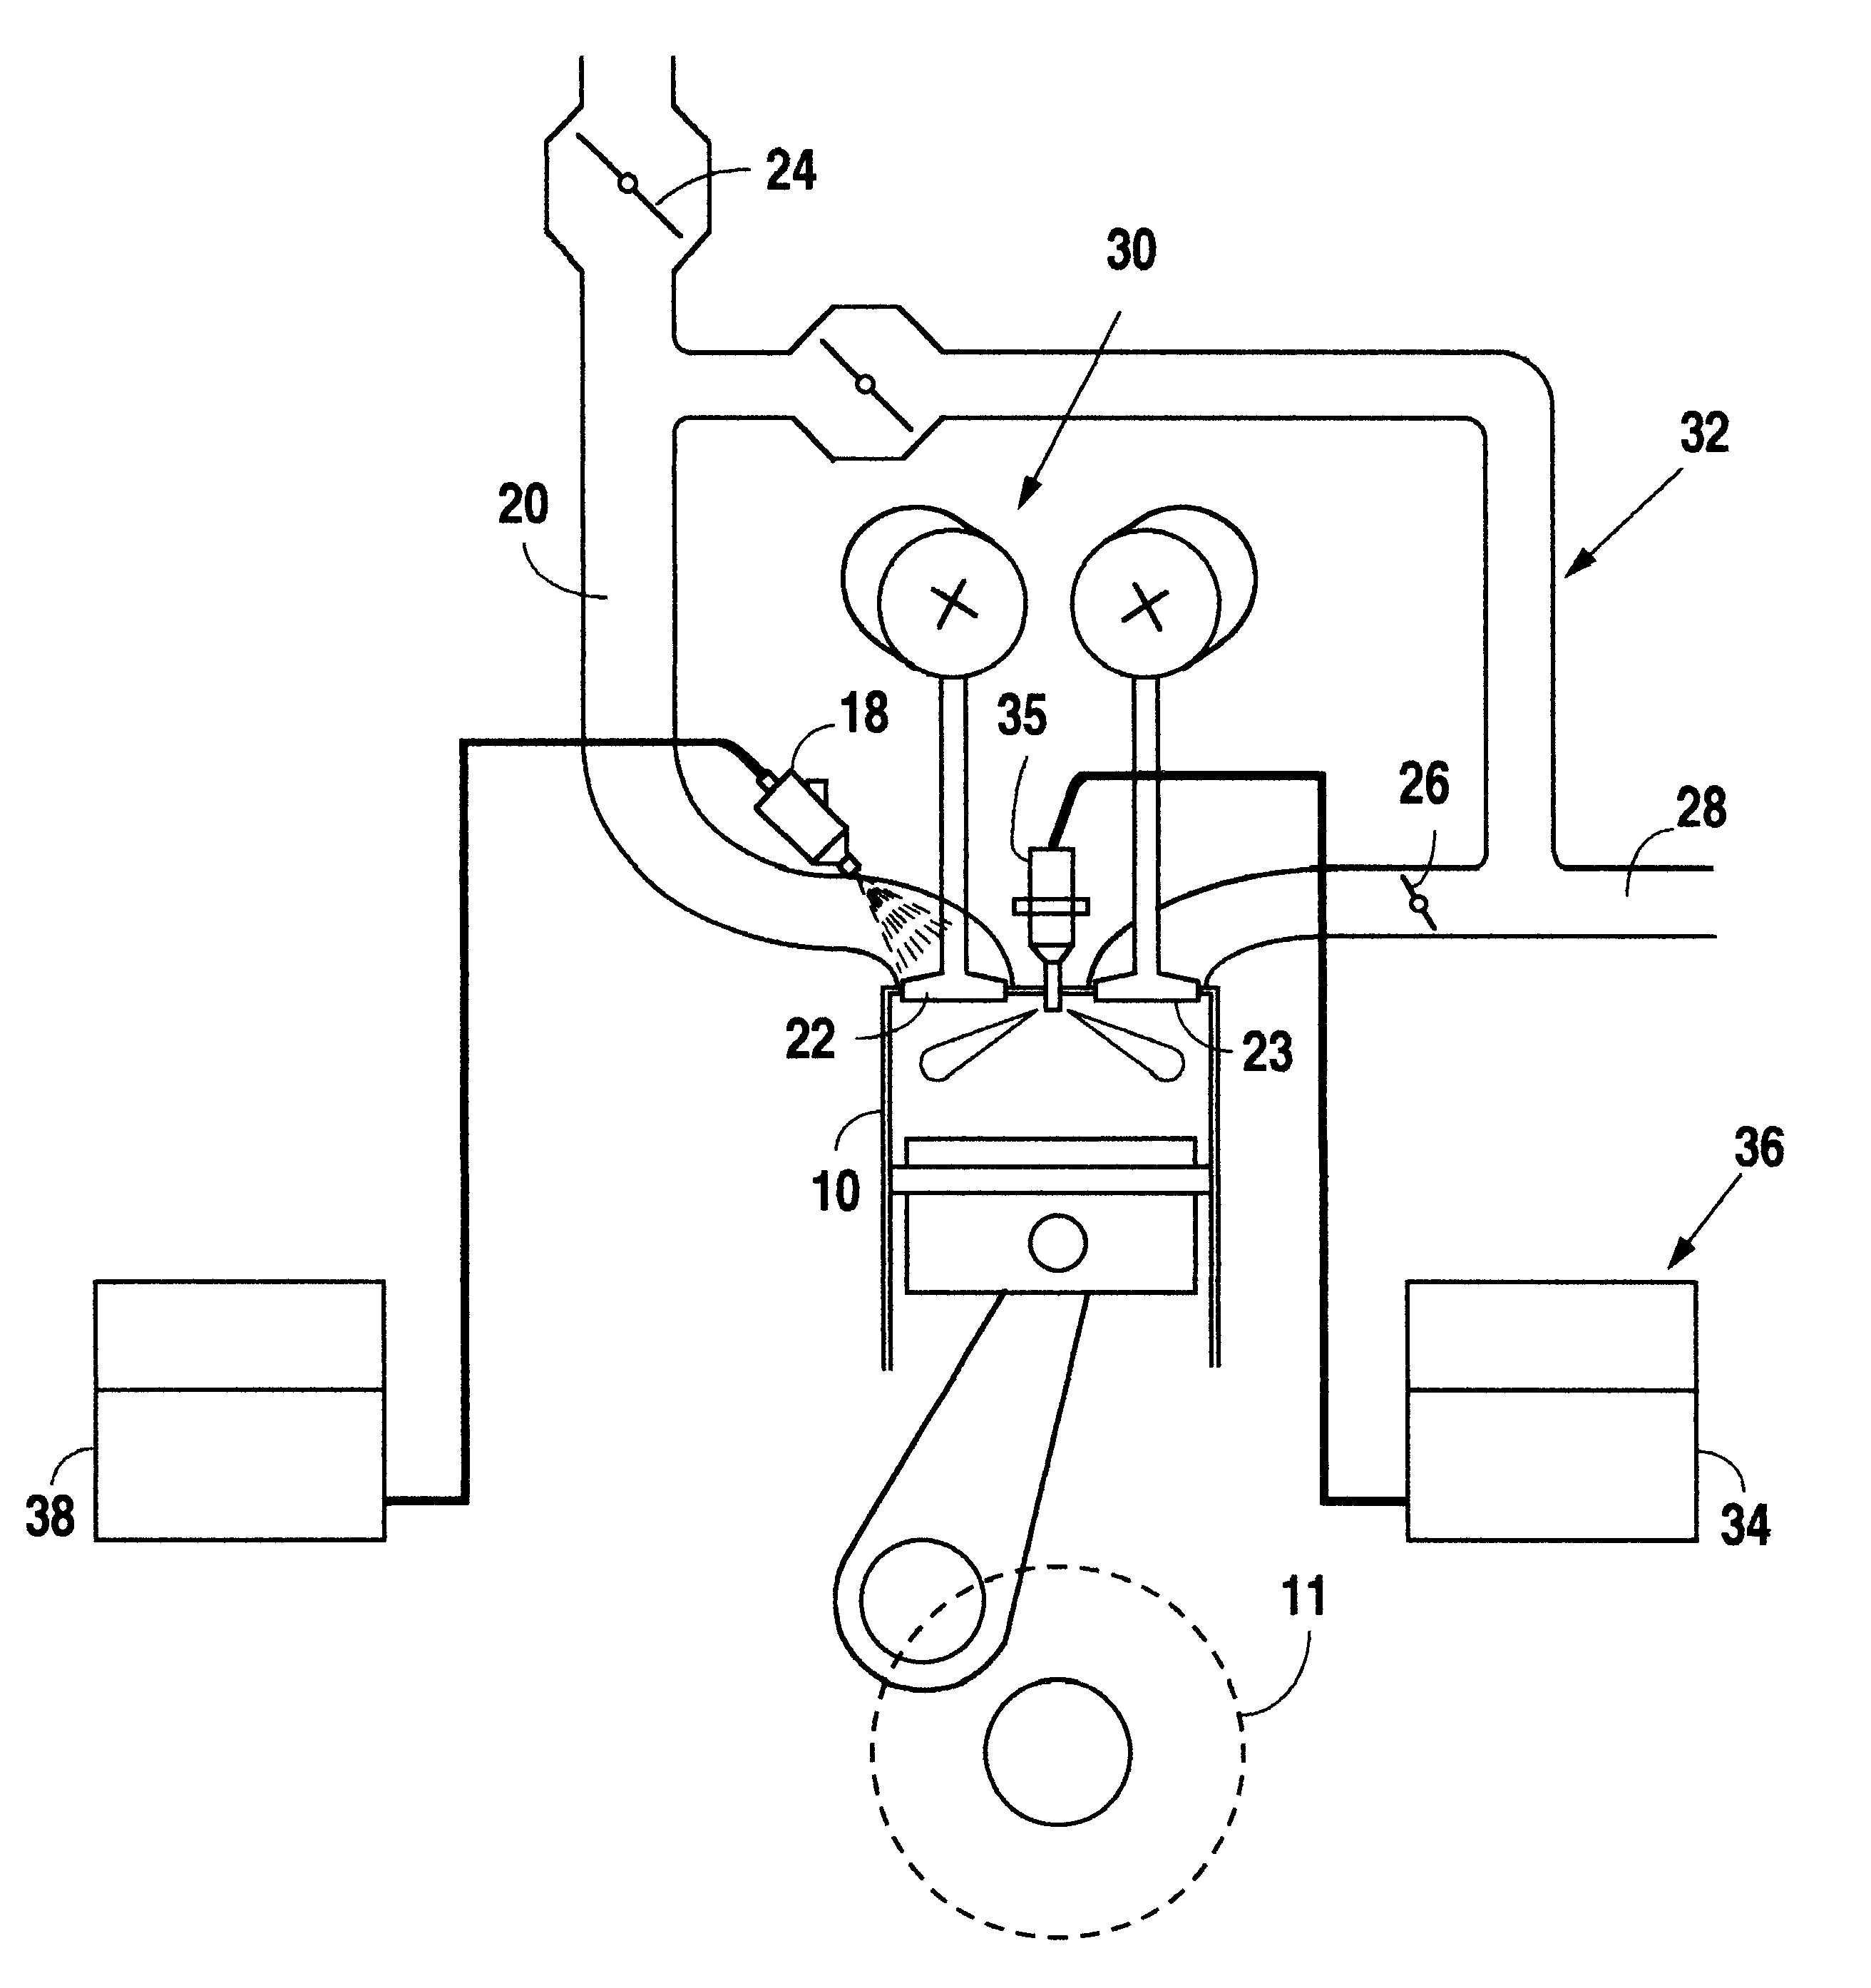 Method and apparatus for operating a diesel engine under stoichiometric or slightly fuel-rich conditions